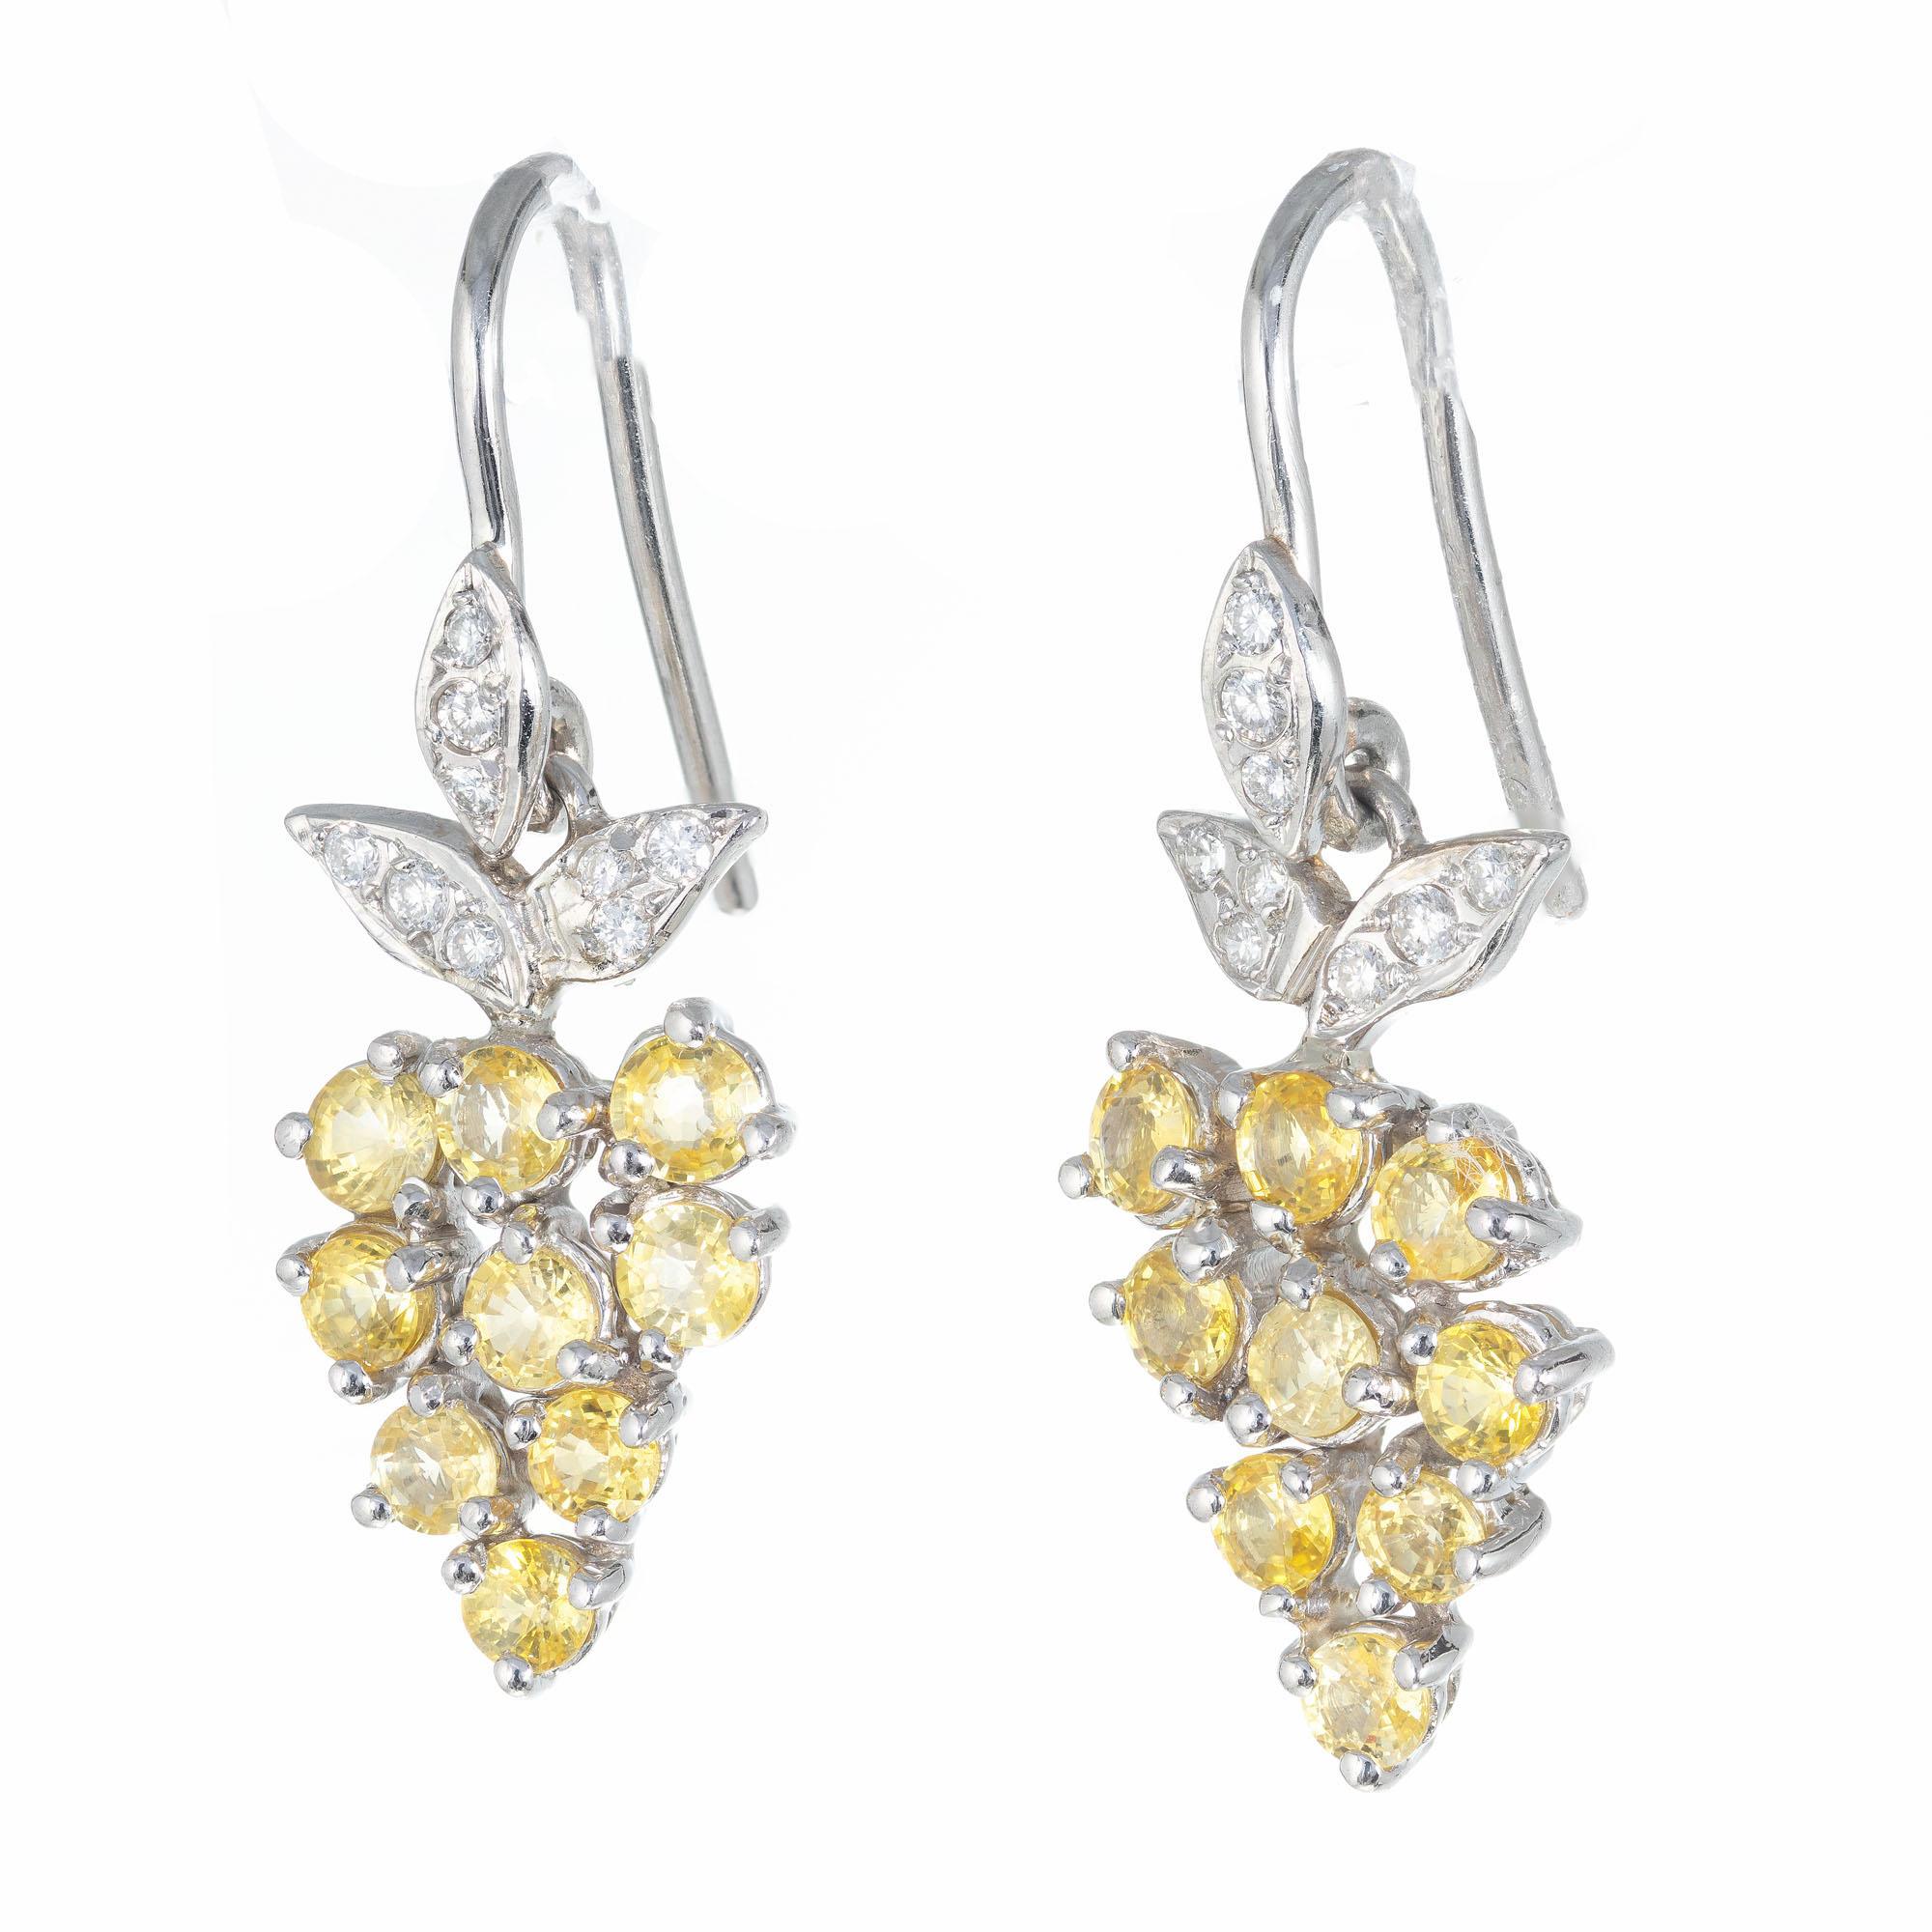 Sapphire and diamond dangle earrings with old European cut yellow Sapphires and Pave set white full cut accent diamonds.

18 round diamonds approx. total weight .12cts
18 round yellow Sapphires approx. total weight 2.70cts
Platinum
Stamped: